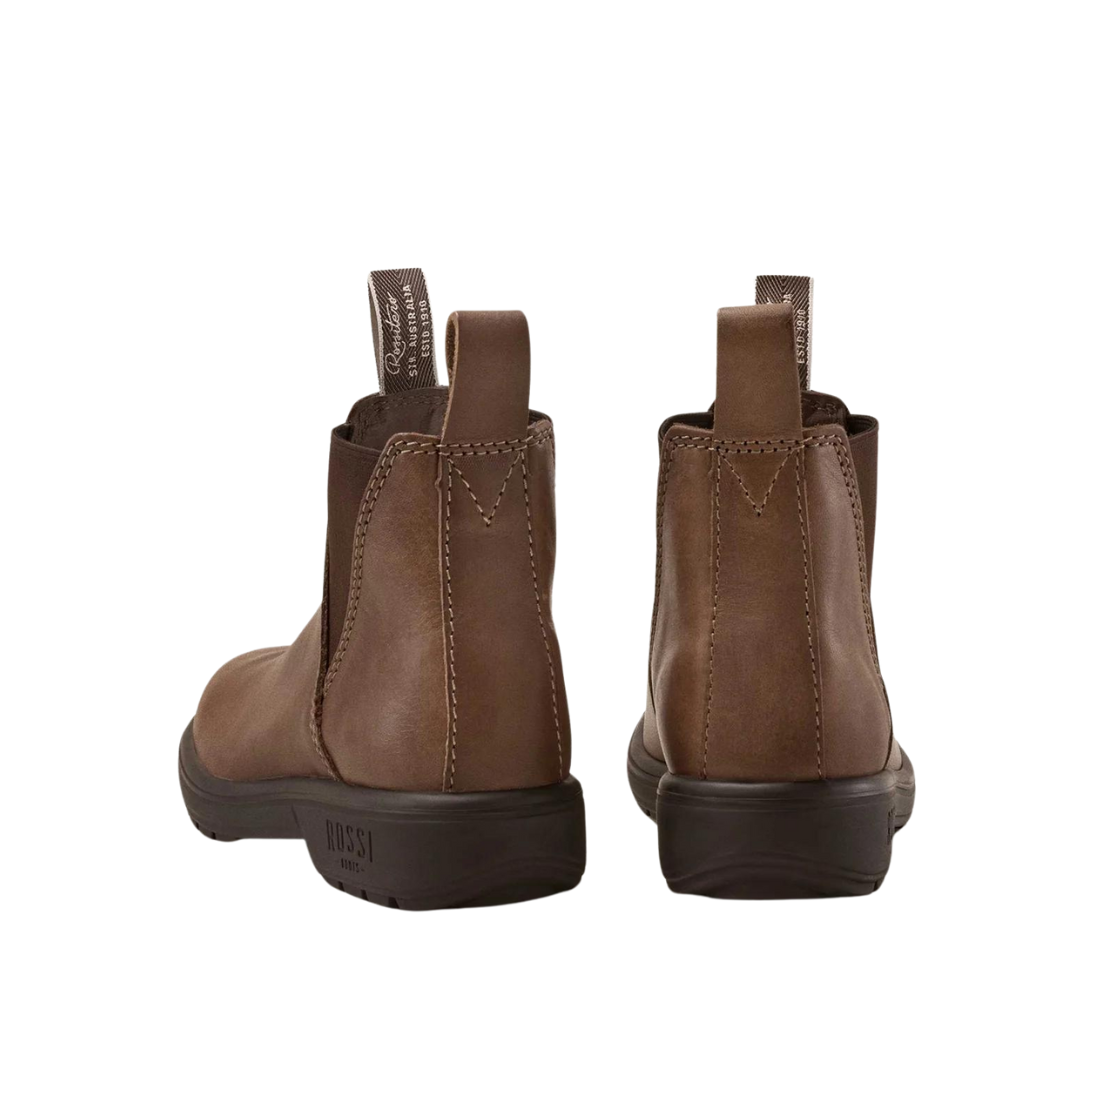 Rossi 342 Ladies Endura Tan Pull on Work Boot Brown Workboots by Rossi | The Bloke Shop